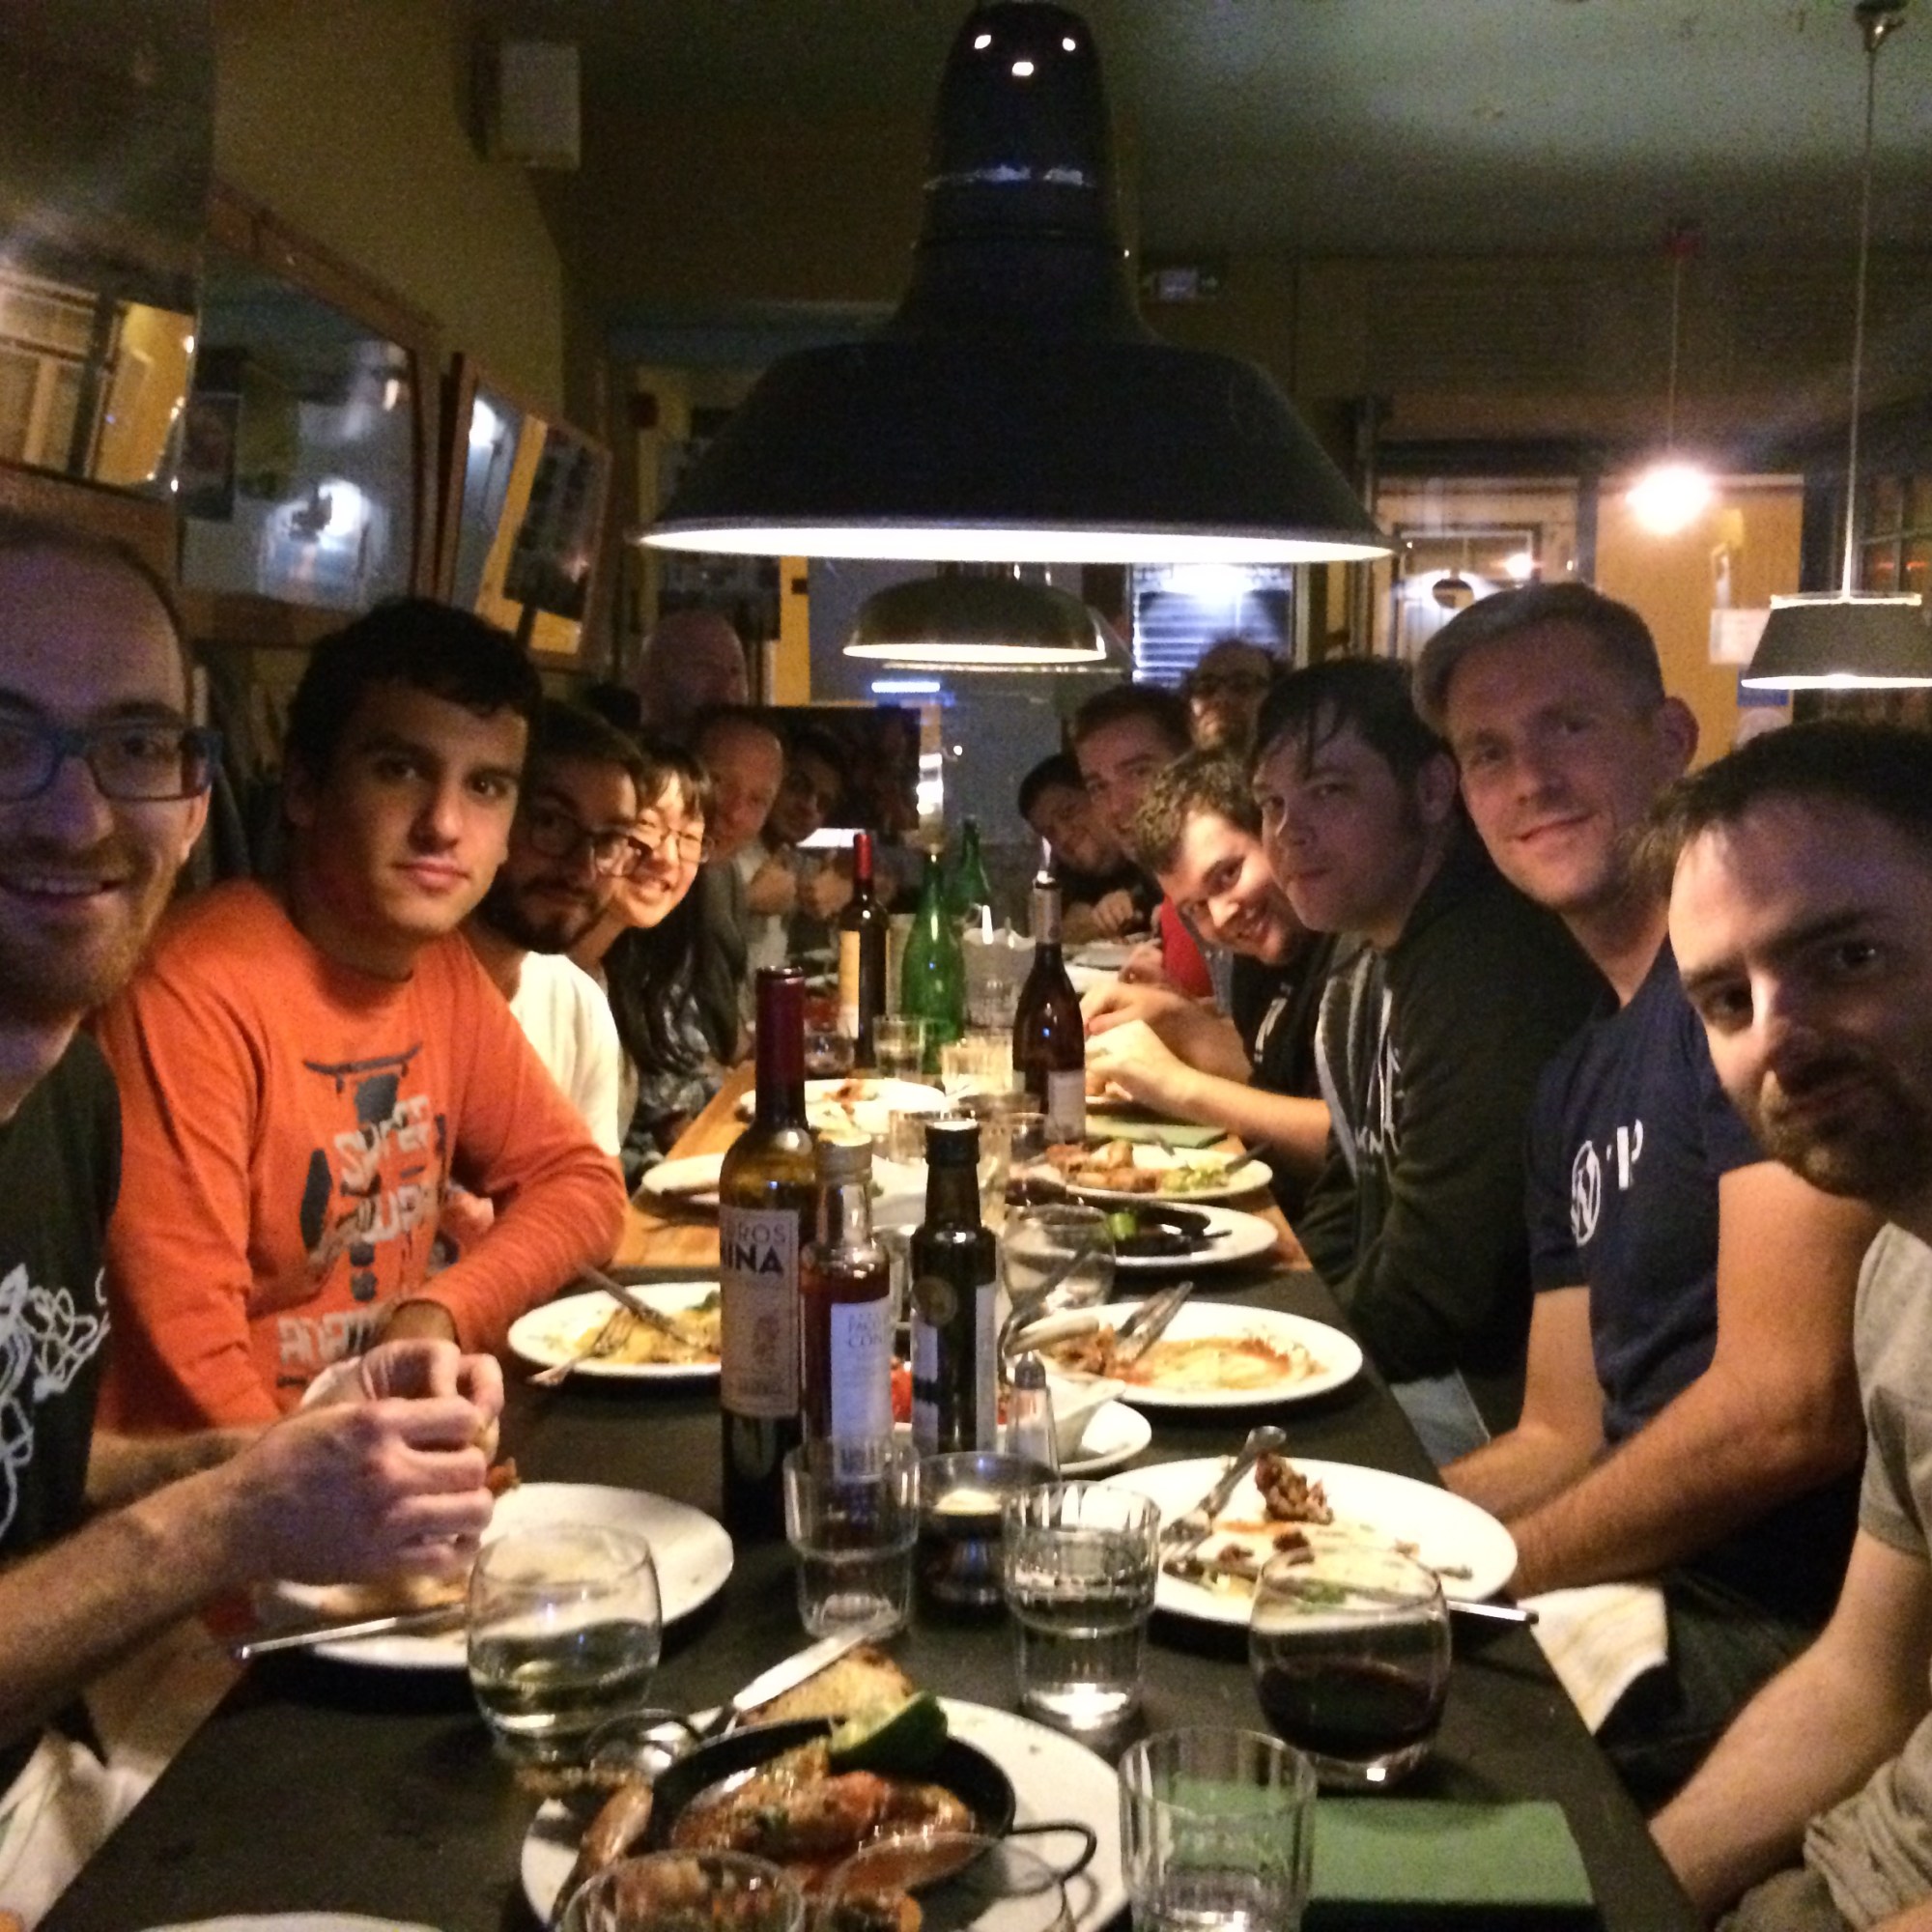 People at a dinner table in a restaurant, on a team meetup in Portugal.